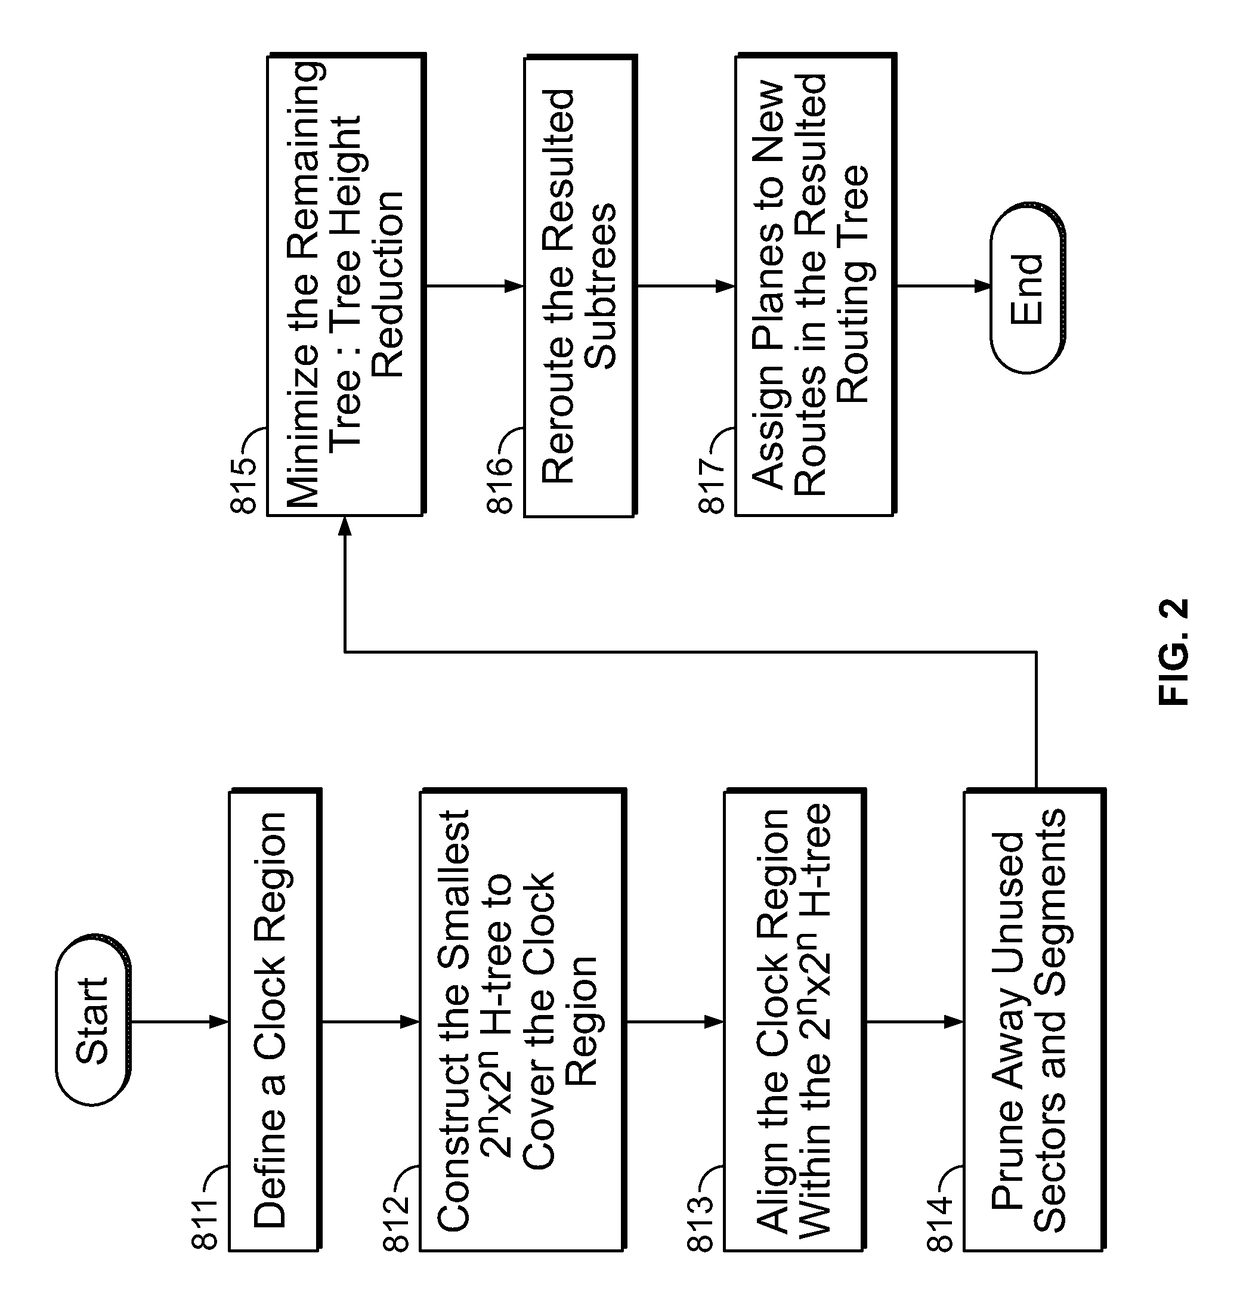 Sector-based clock routing methods and apparatus